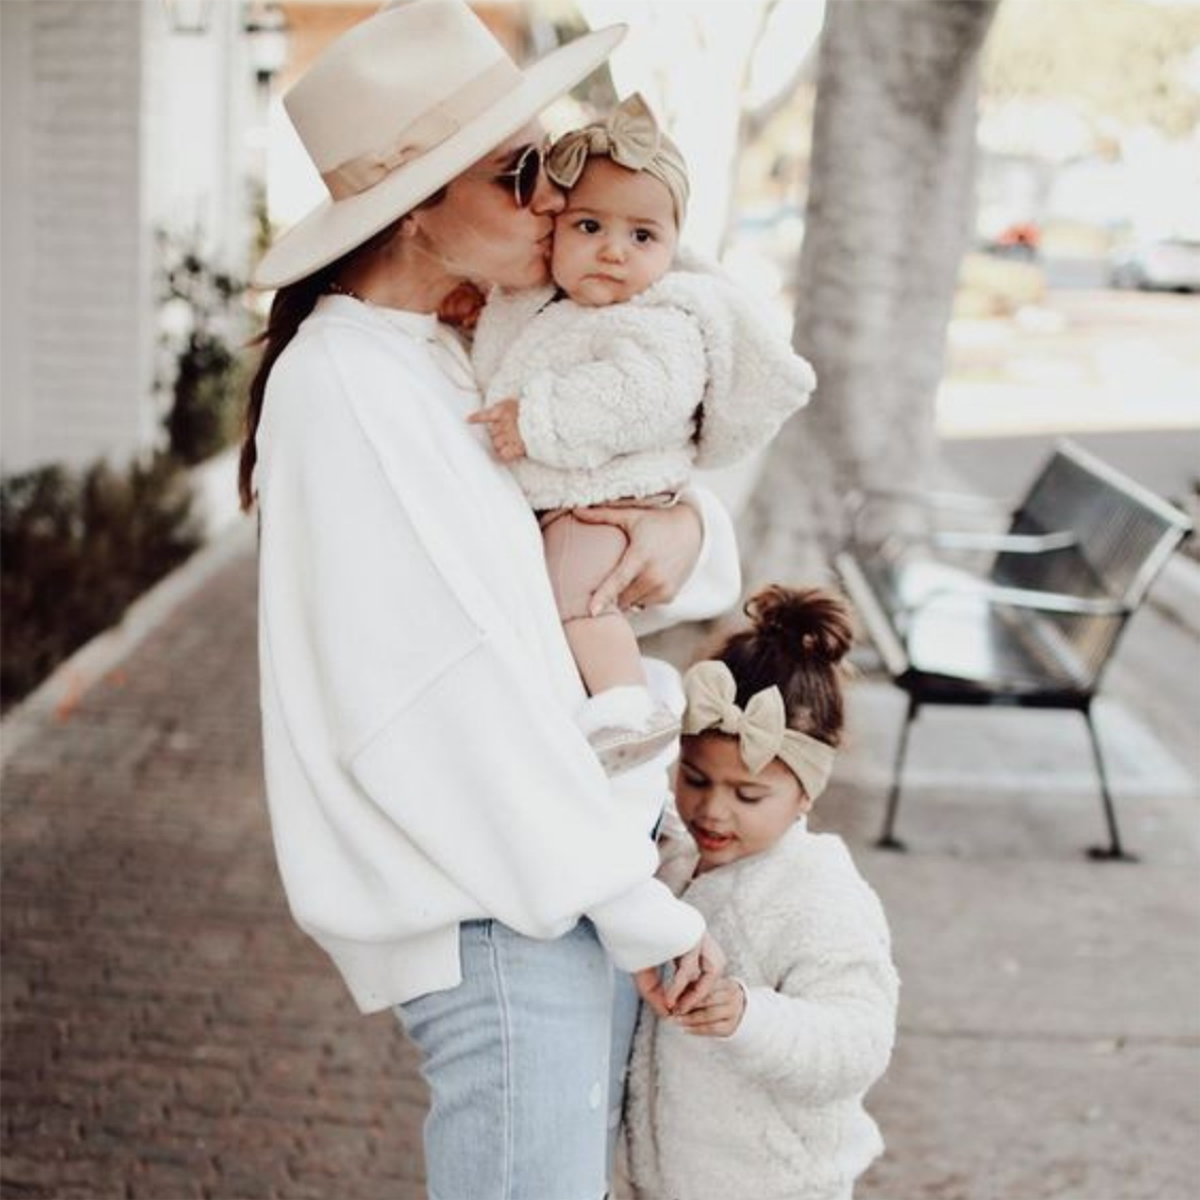 Mother Daughter Photoshoot Outfit Ideas